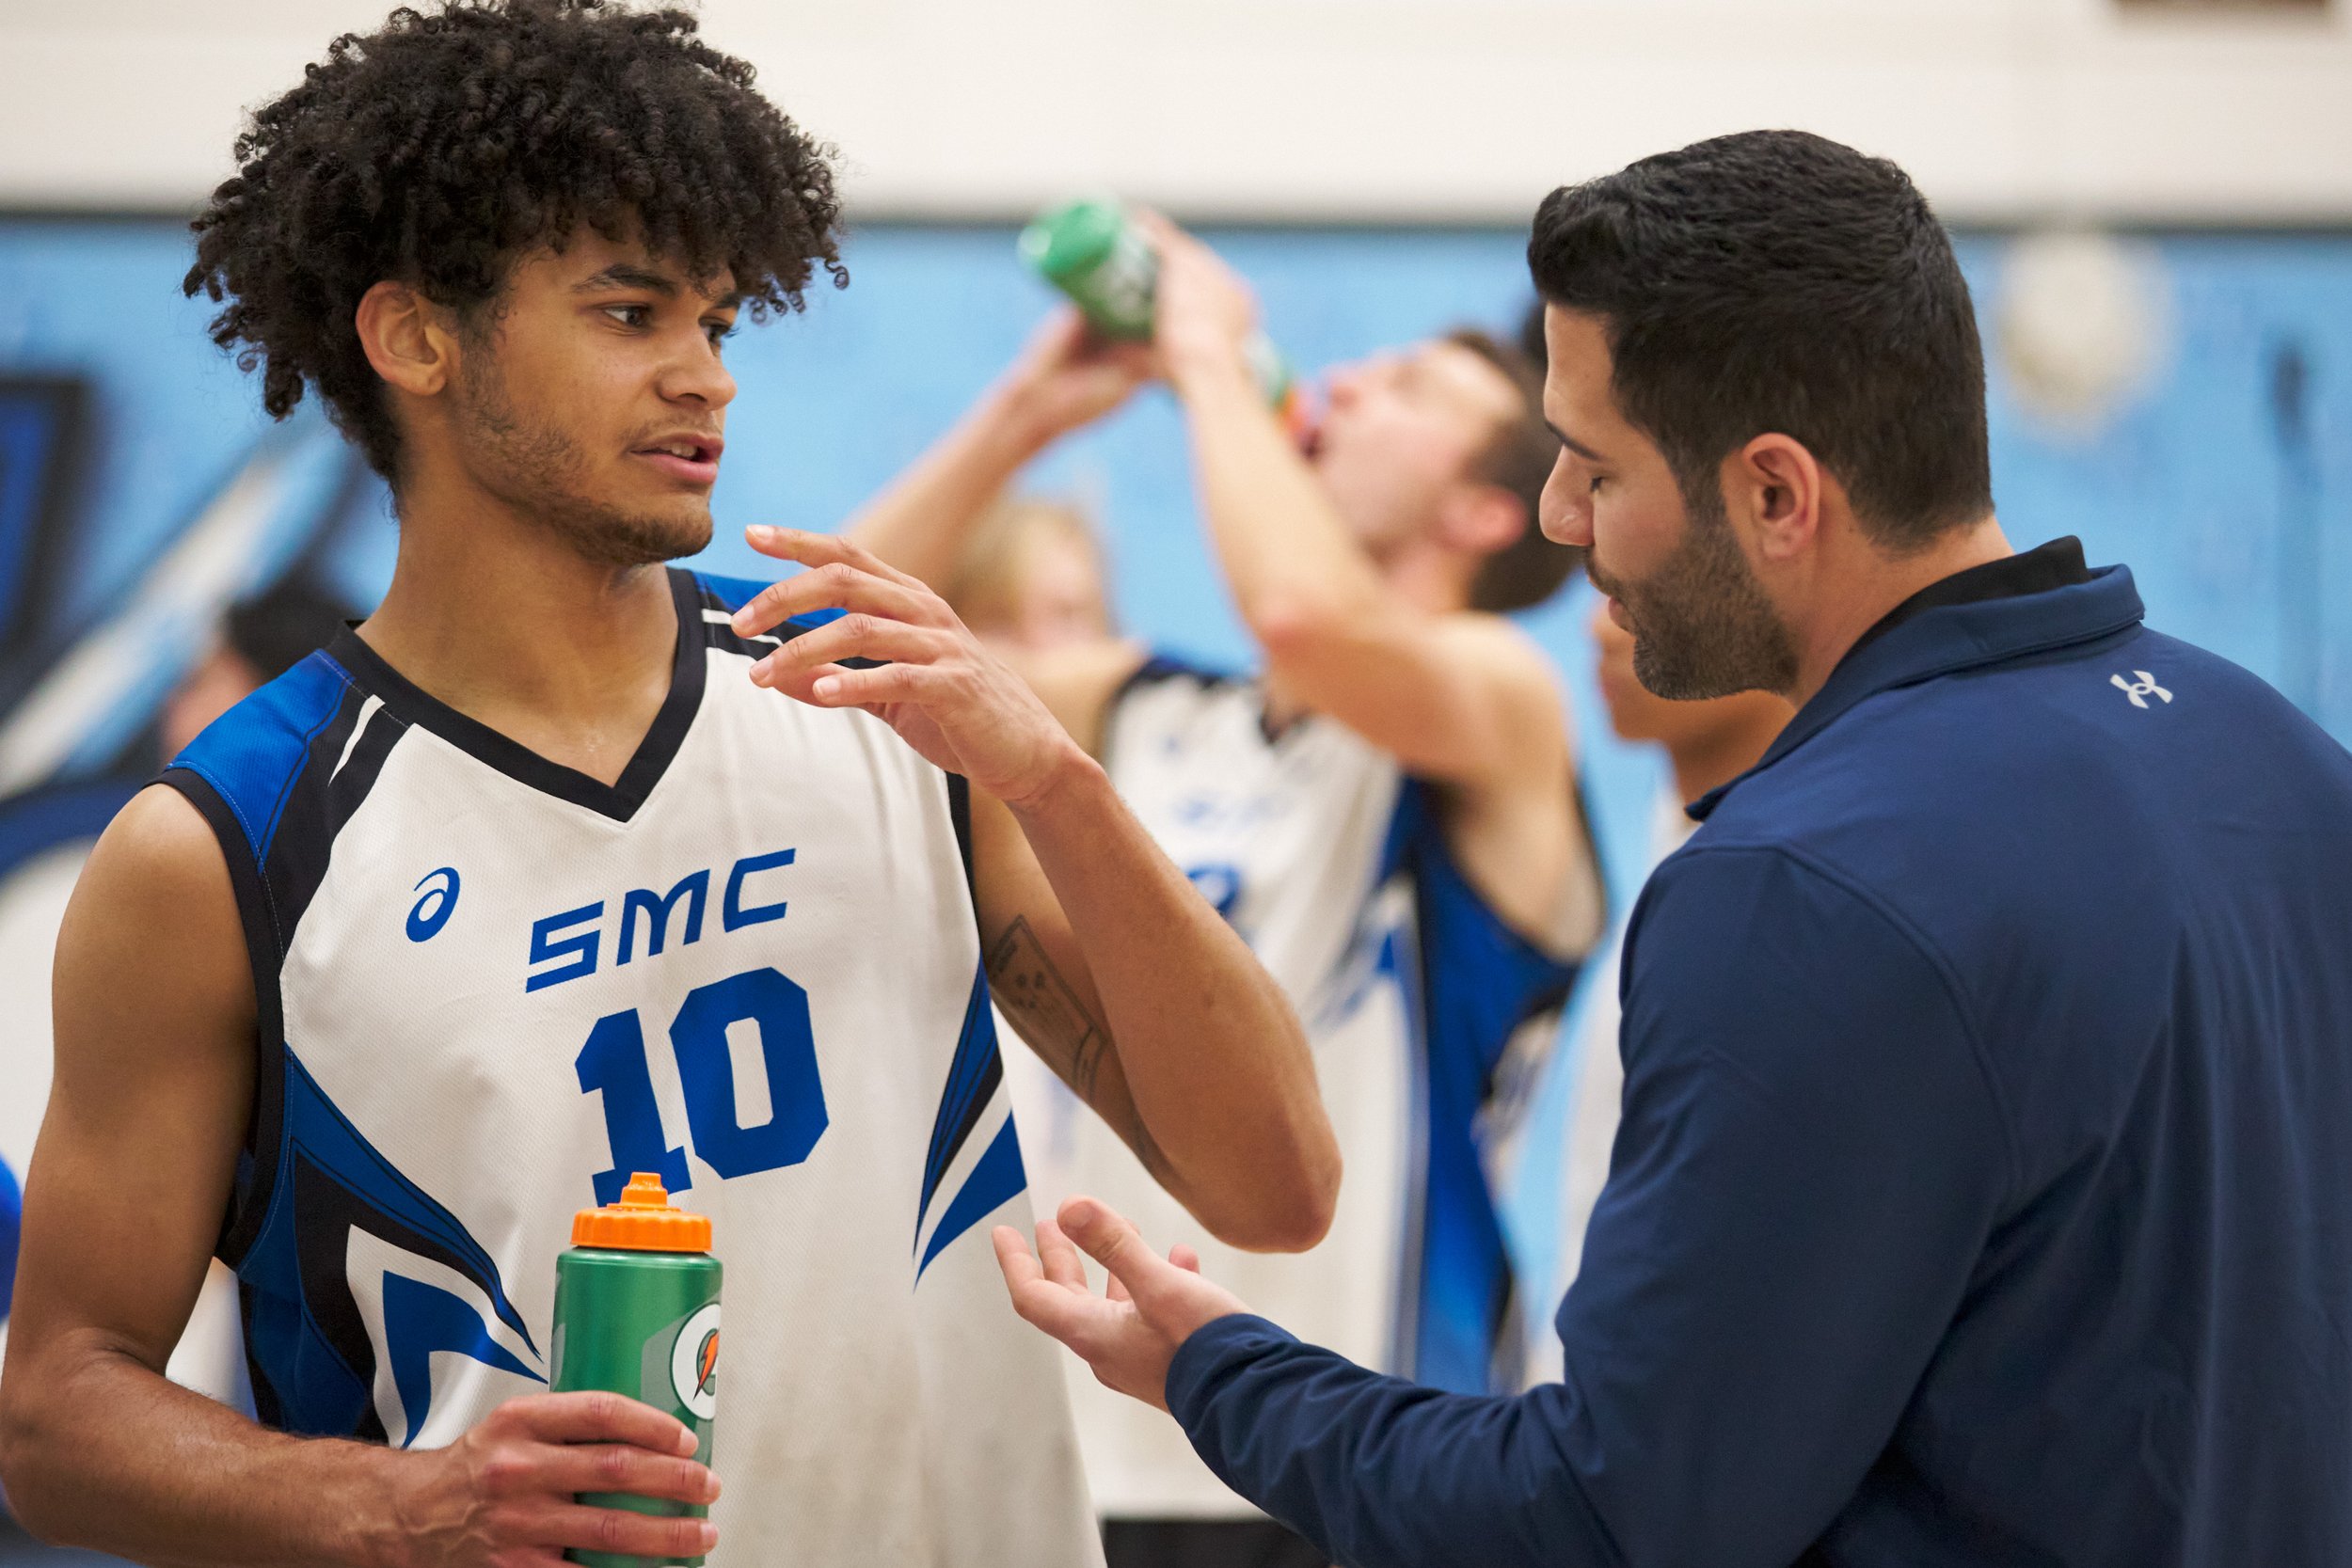  Santa Monica College Corsairs' Nate Davis talks with men's volleyball head coach Liran Zamir during the men's volleyball match against the Moorpark College Raiders on Friday, March 17, 2023, at Moorpark College's Gymnasium in Moorpark, Calif. The Co